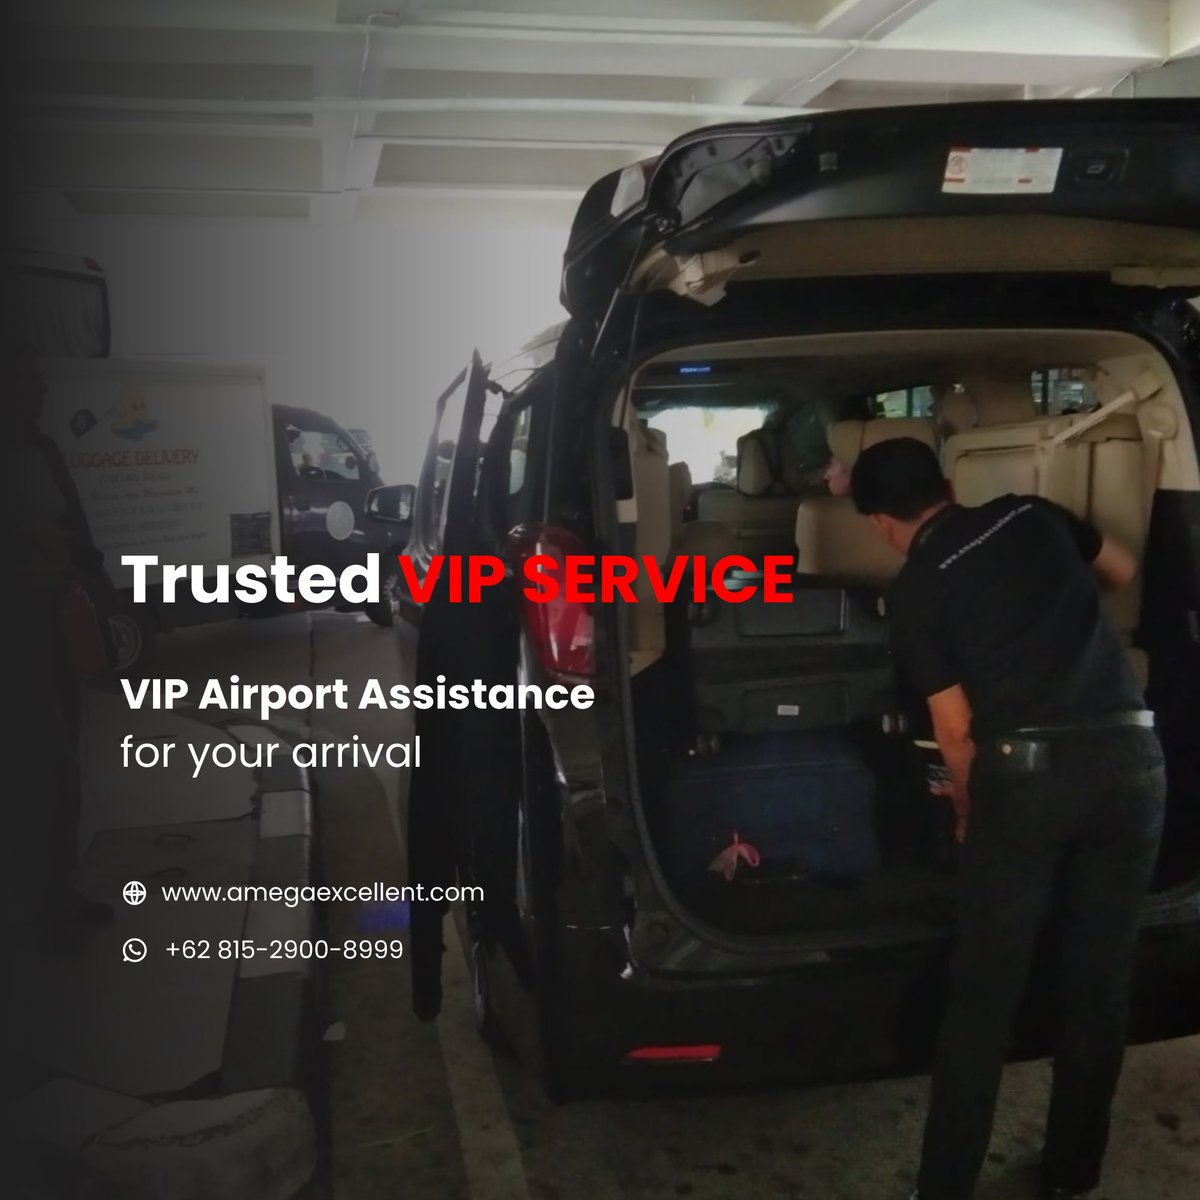 VIP Airport Assistance is the ultimate choice for seamless arrivals and departures. 

Let VIP Airport Assistance handle your luggage while you focus on your journey ahead. 

#TravelInLuxury #VIPServices #groundhandling